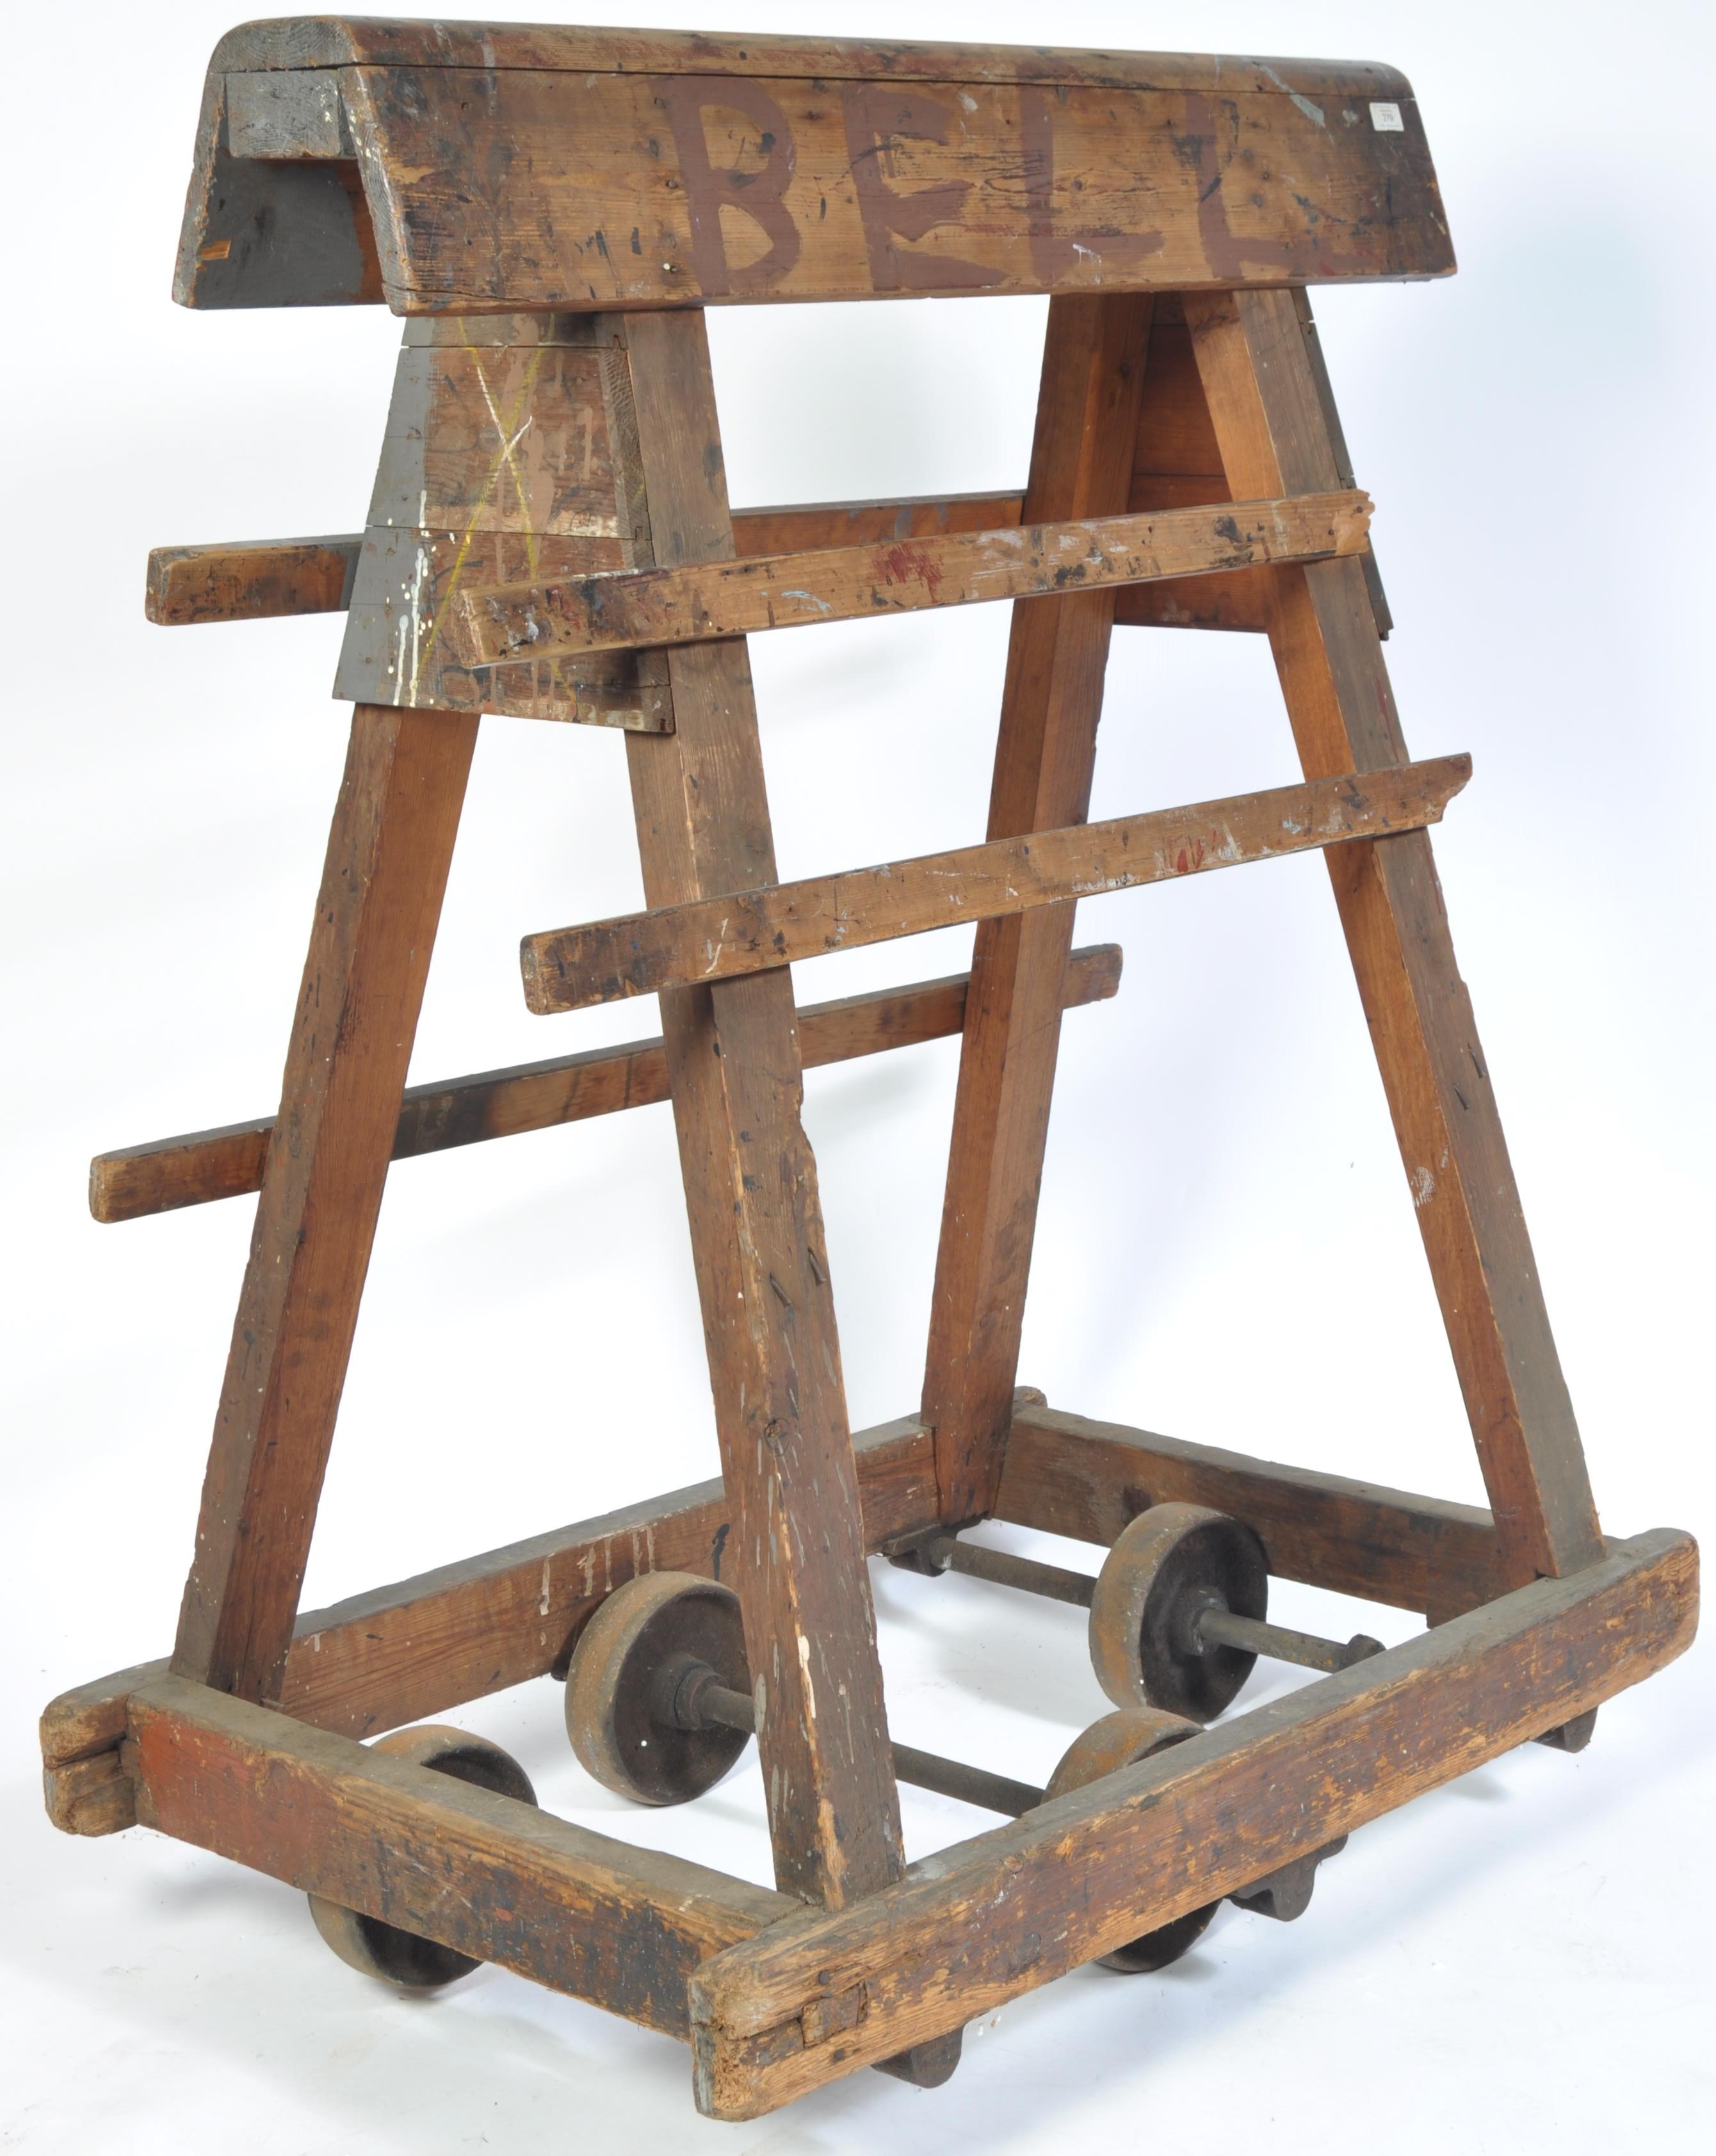 ANTIQUE VINTAGE INDUSTRIAL WOODEN FACTORY MILL TROLLEY - Image 2 of 5